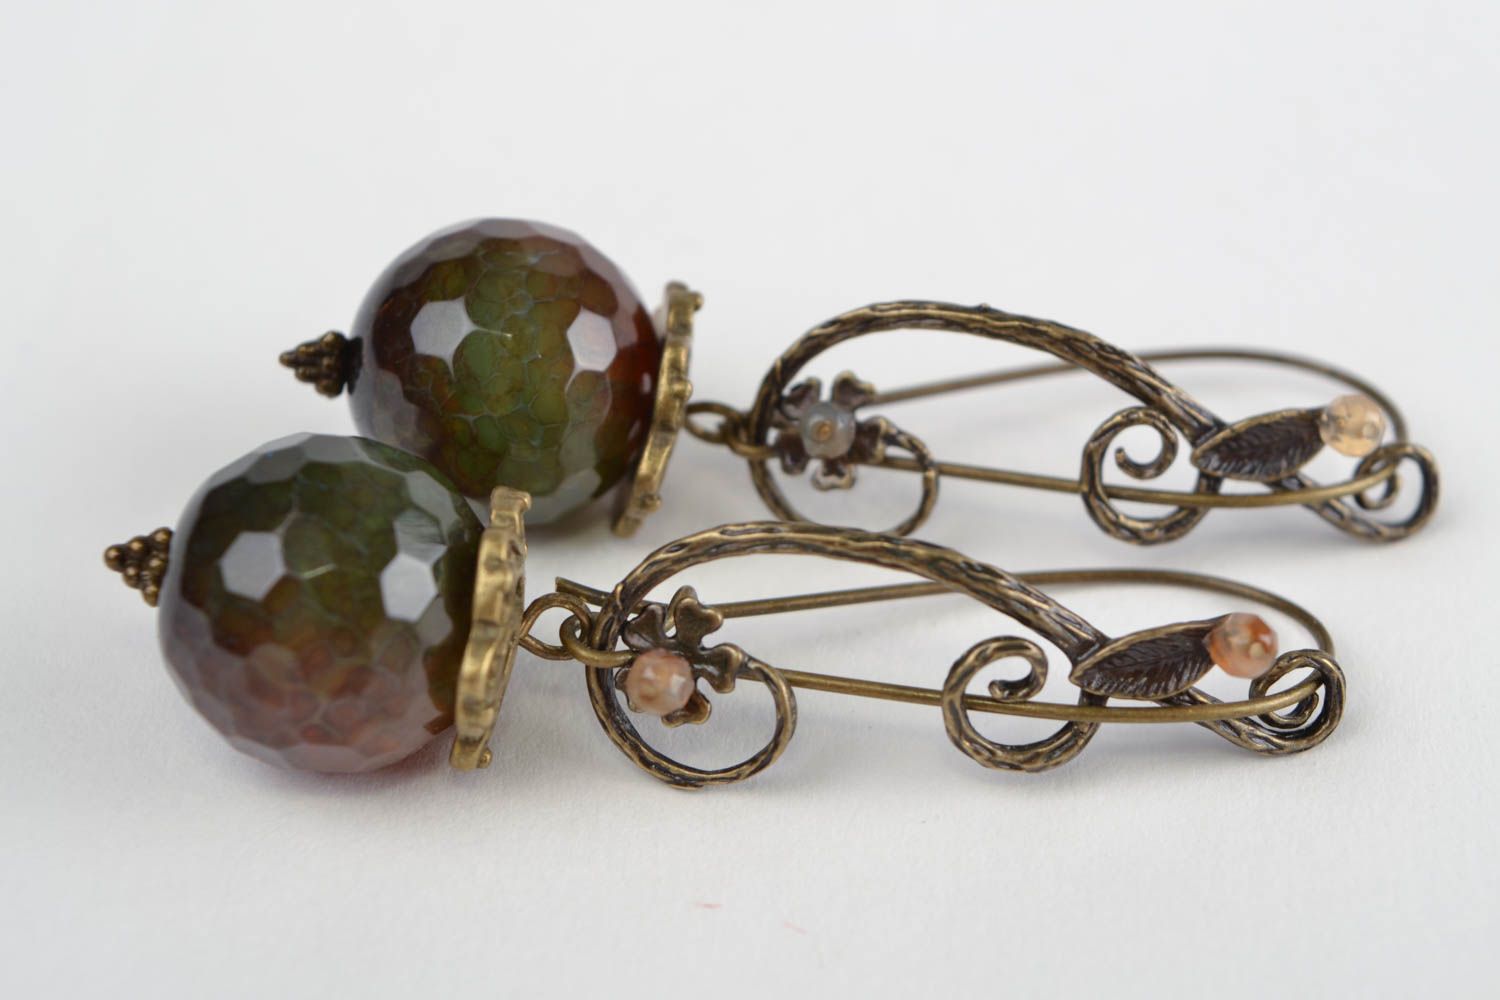 Handmade dangling earrings with fancy metal fittings and snake agate stone beads photo 2